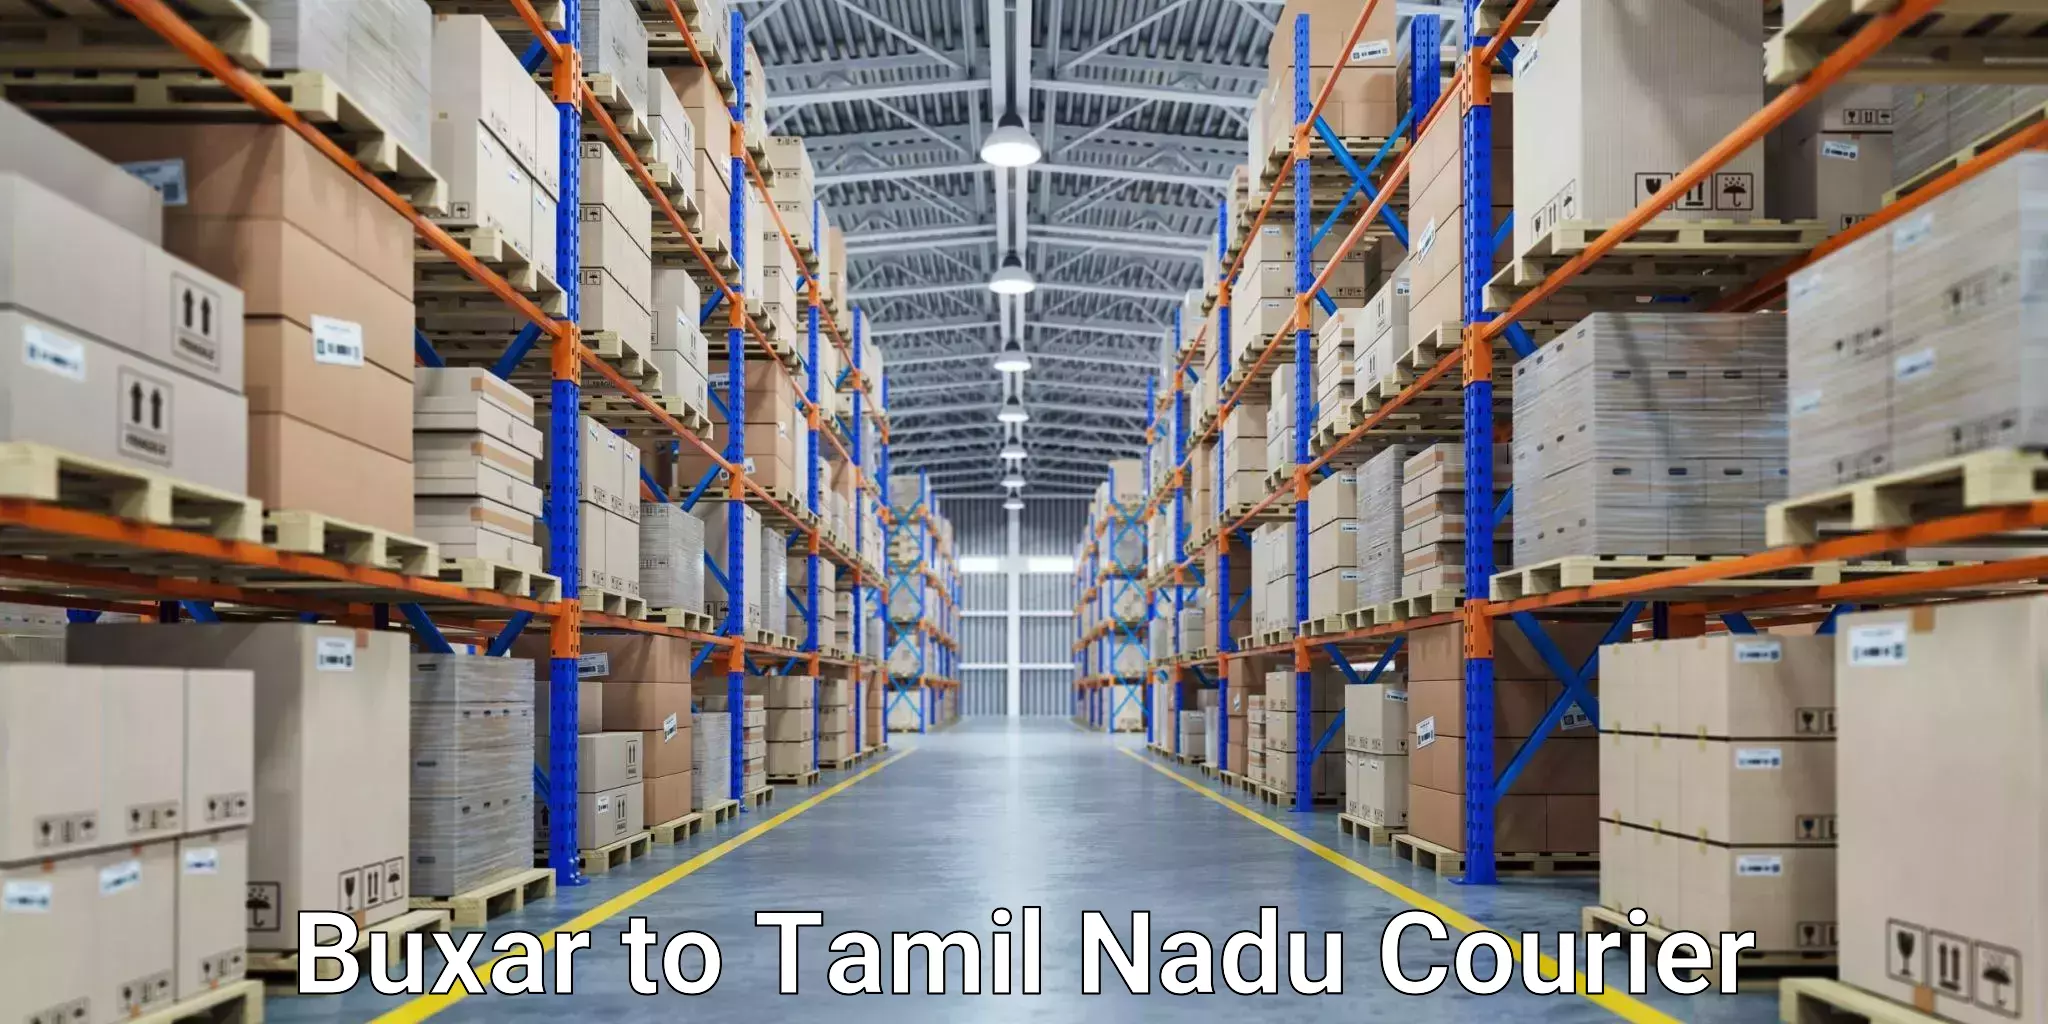 Efficient shipping operations Buxar to Tamil Nadu